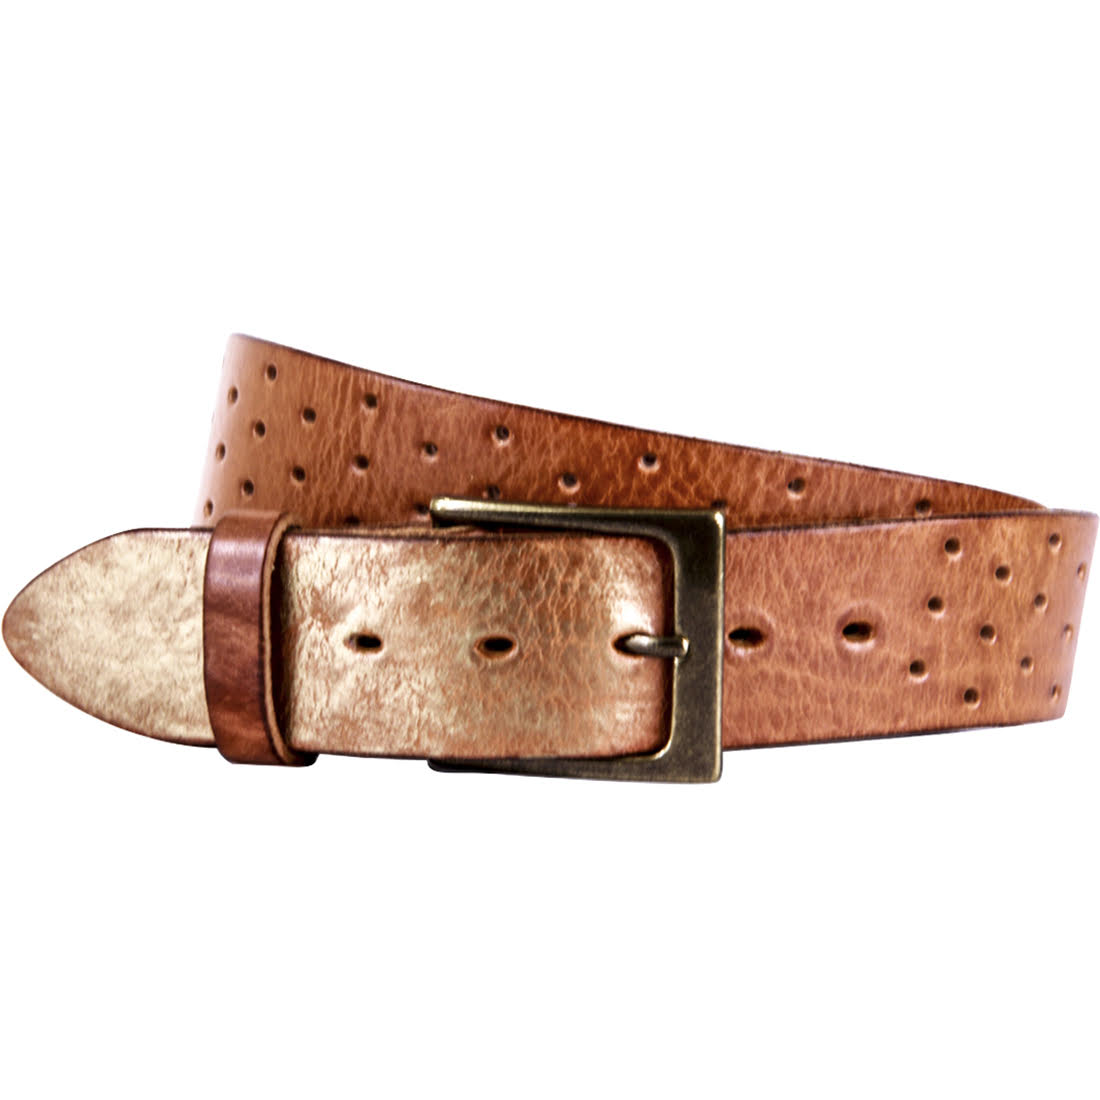 Curved Handmade Leather Belts, Perforata Cognac